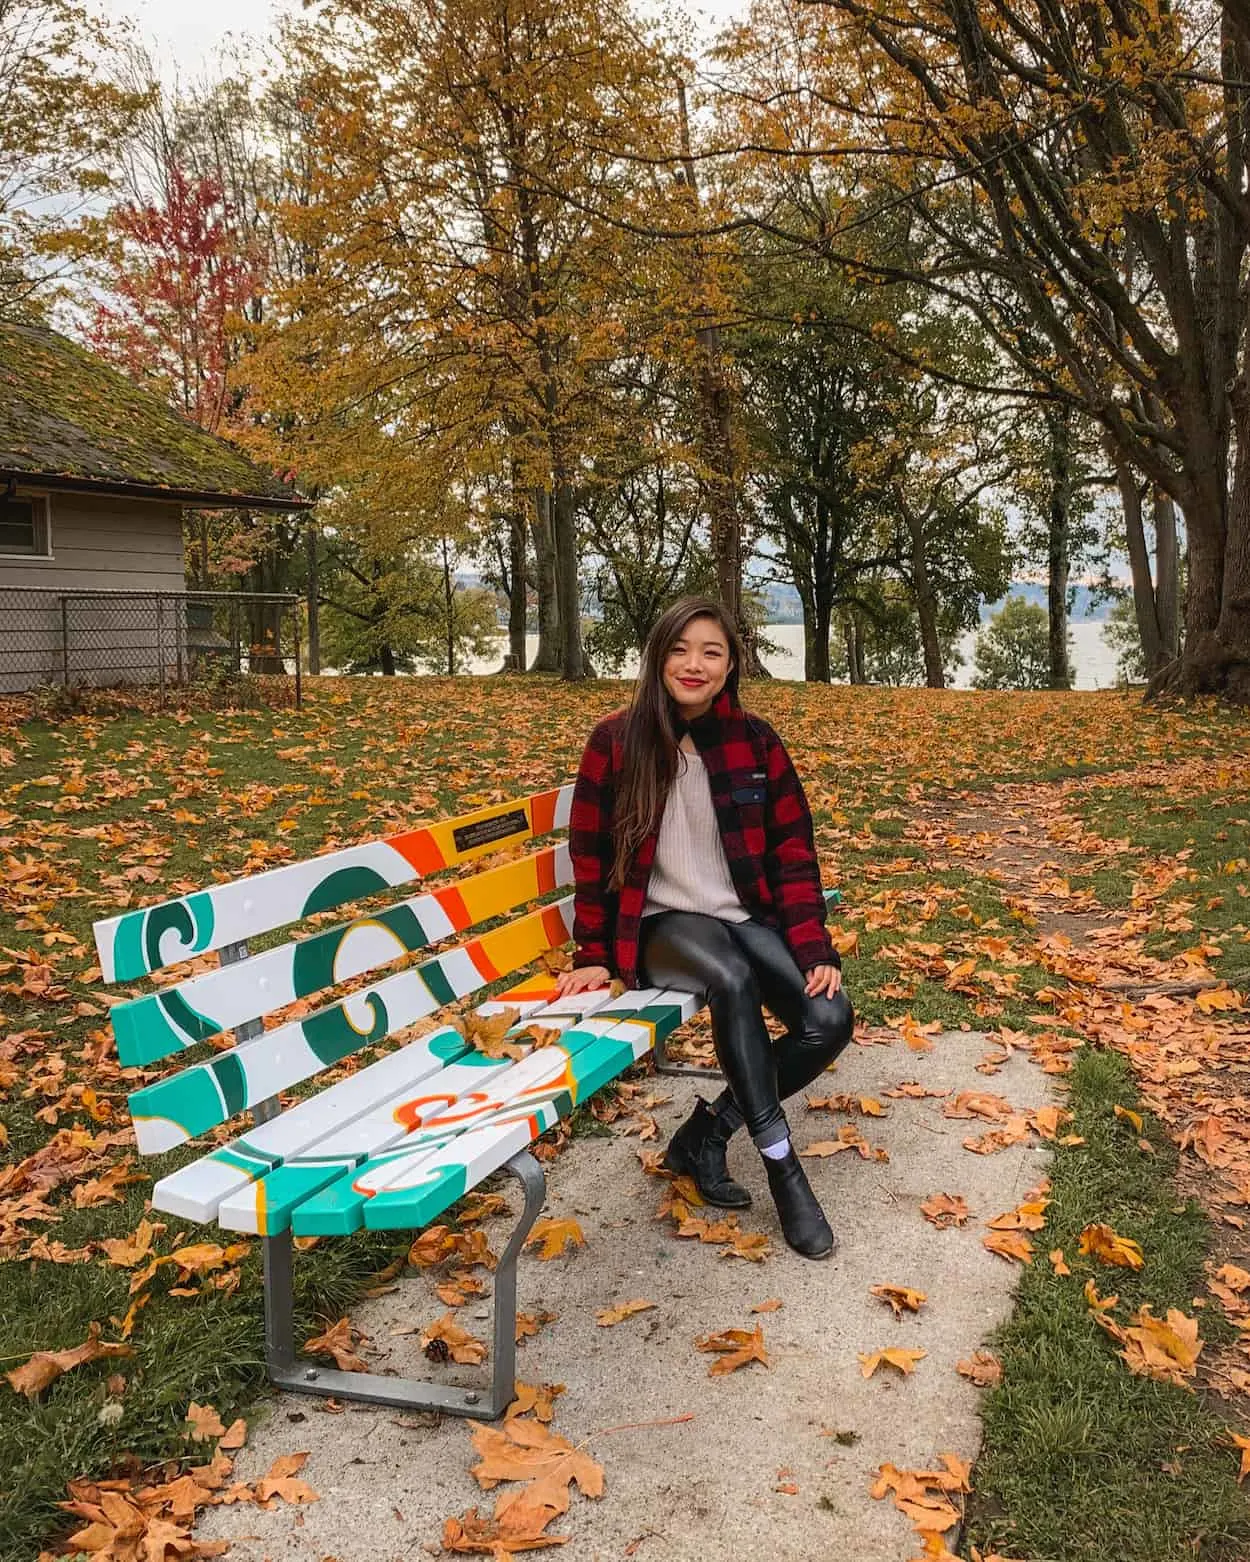 Fall weather at Stanley Park in Vancouver, British Columbia